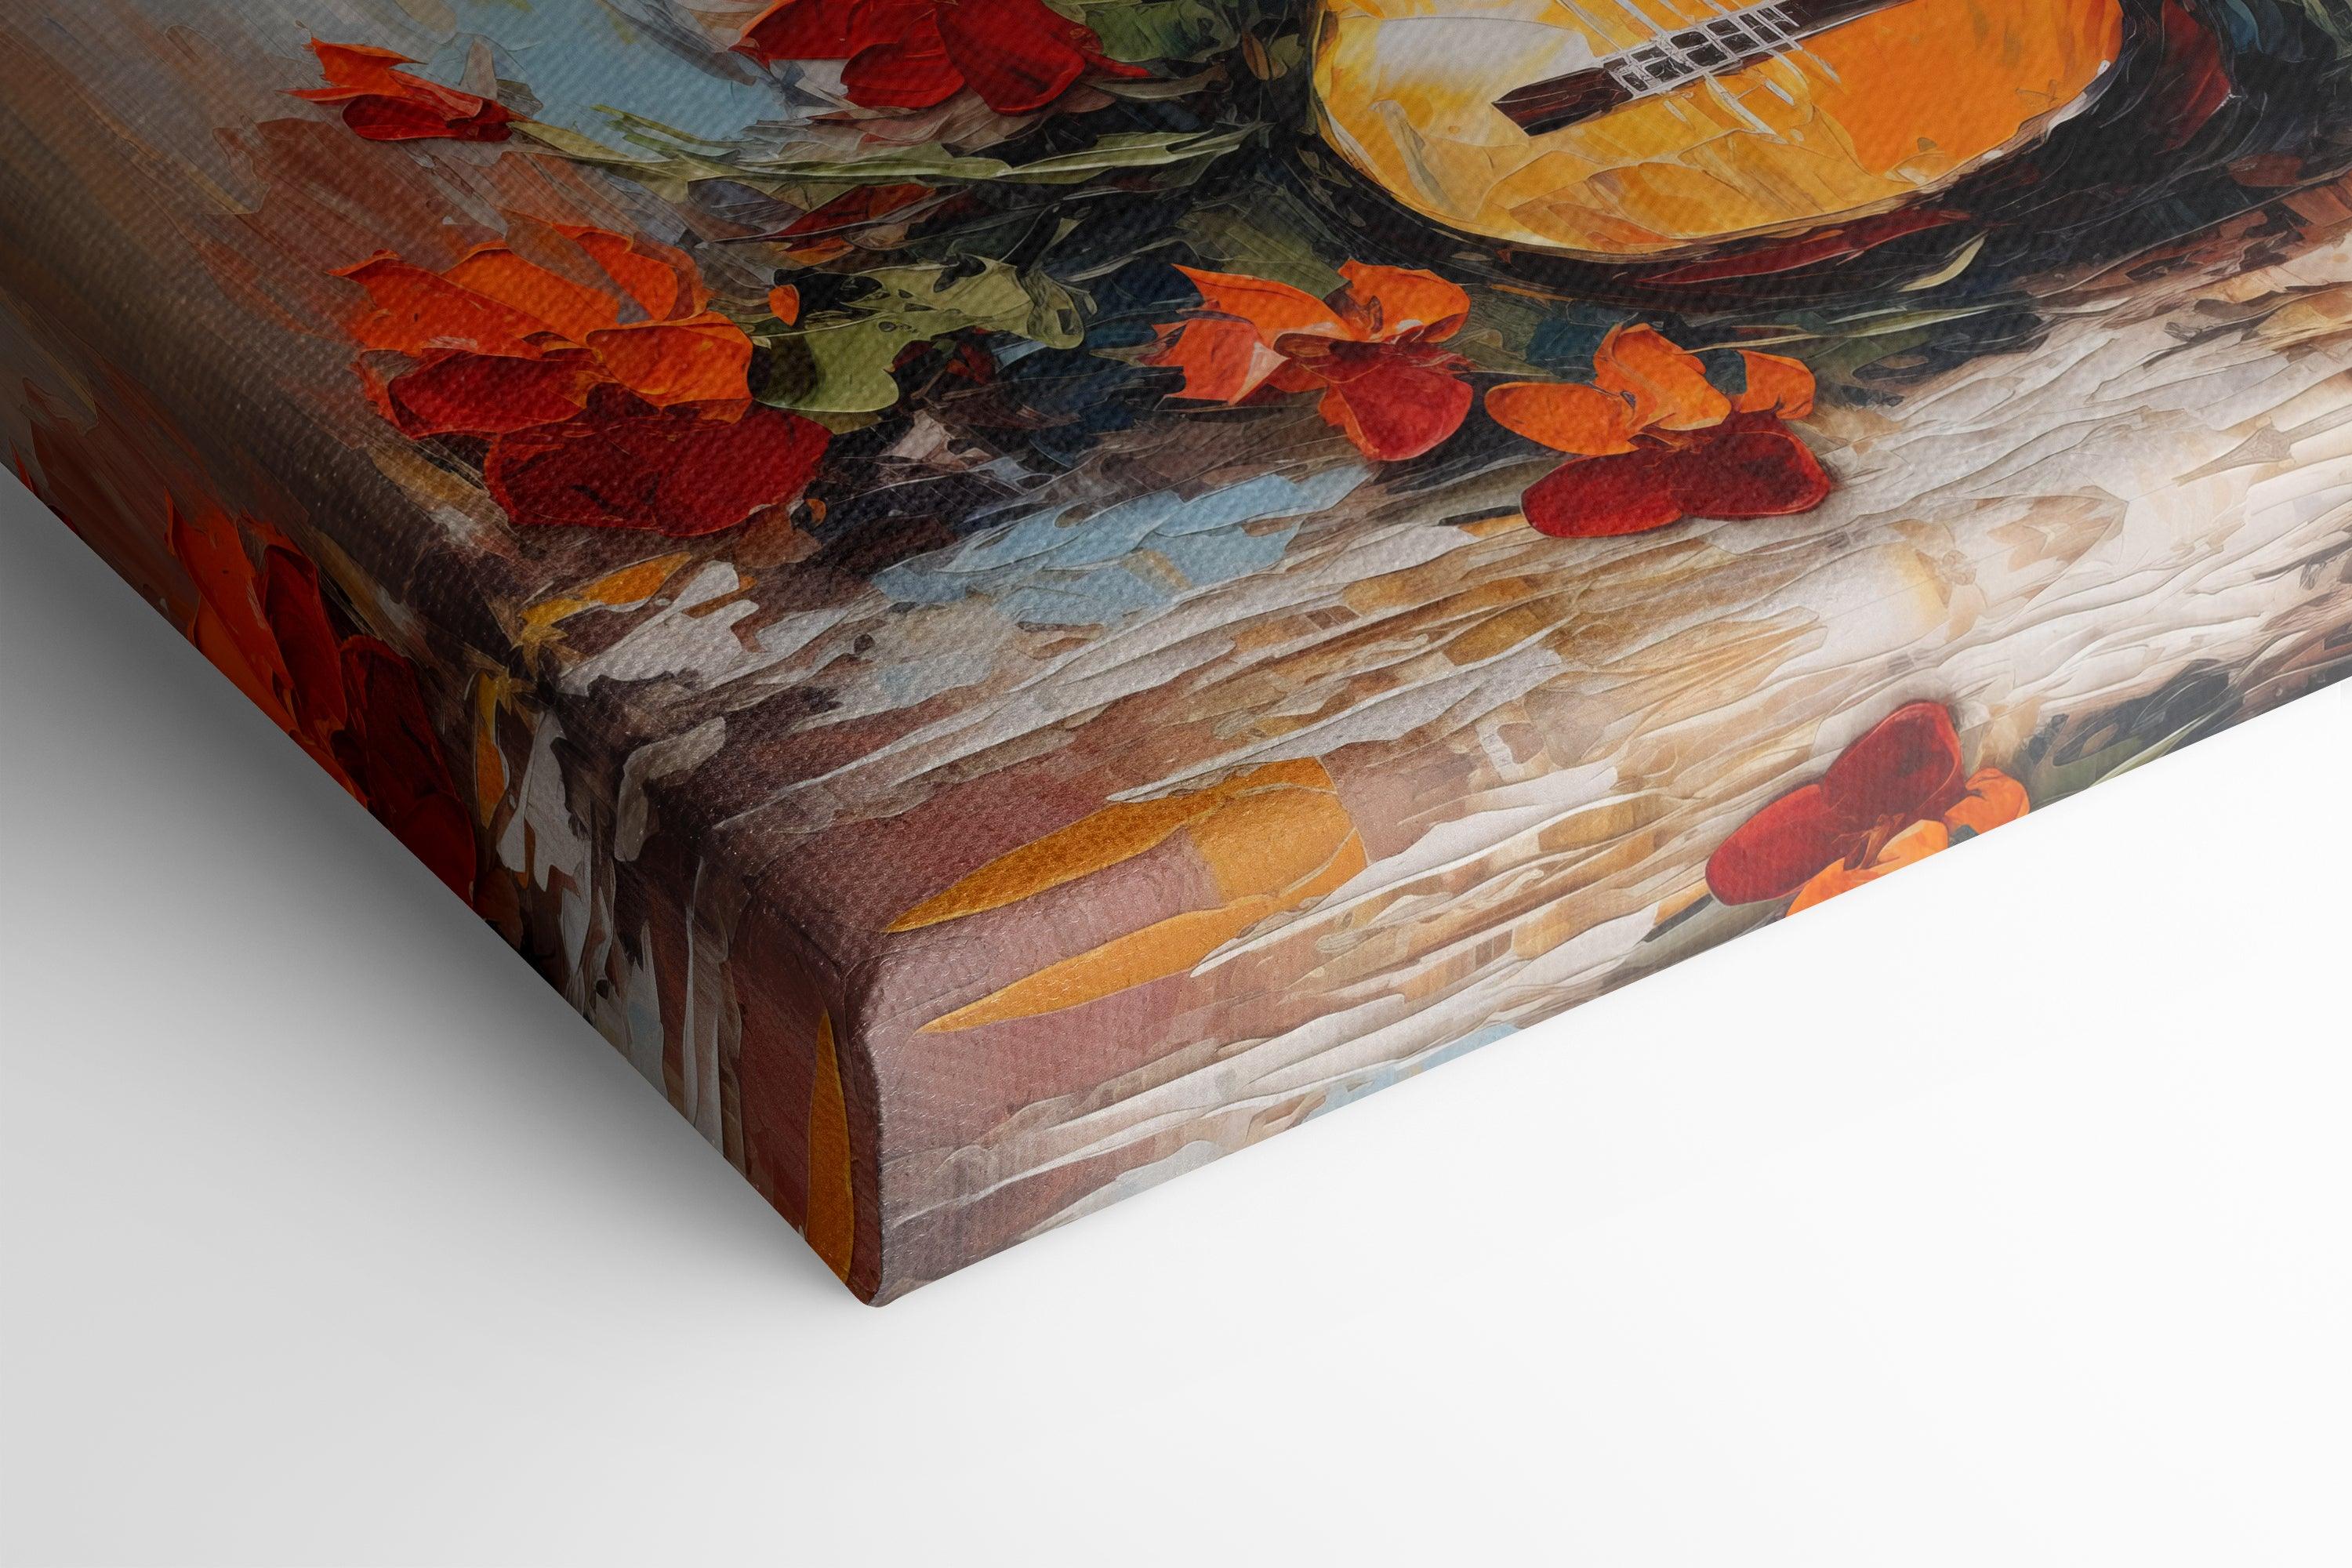 Impressionist Canvas Print of a Guitar with Red Flowers - Artoholica Ready to Hang Canvas Print